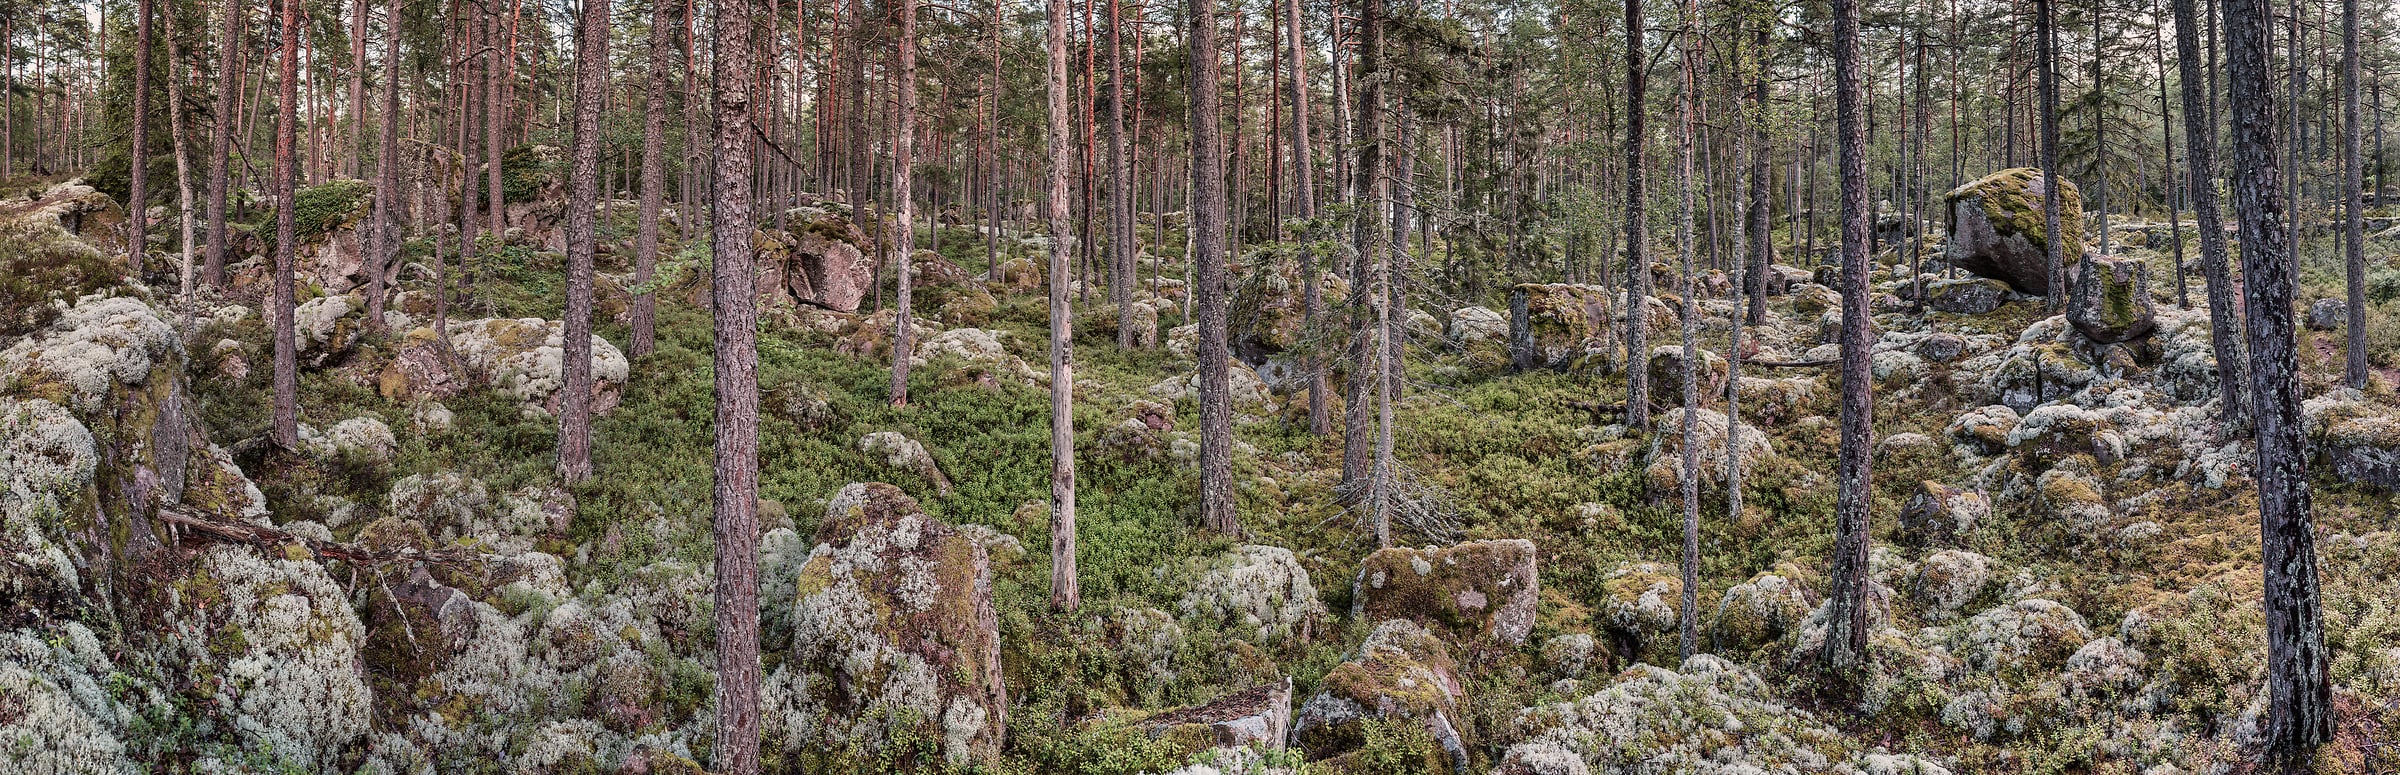 2,548 megapixels! A very high resolution wallpaper photo of a forest; nature photograph created by Alfred Feil in Stora Hammarsjoen, Kallersbo, Smaland, Sweden